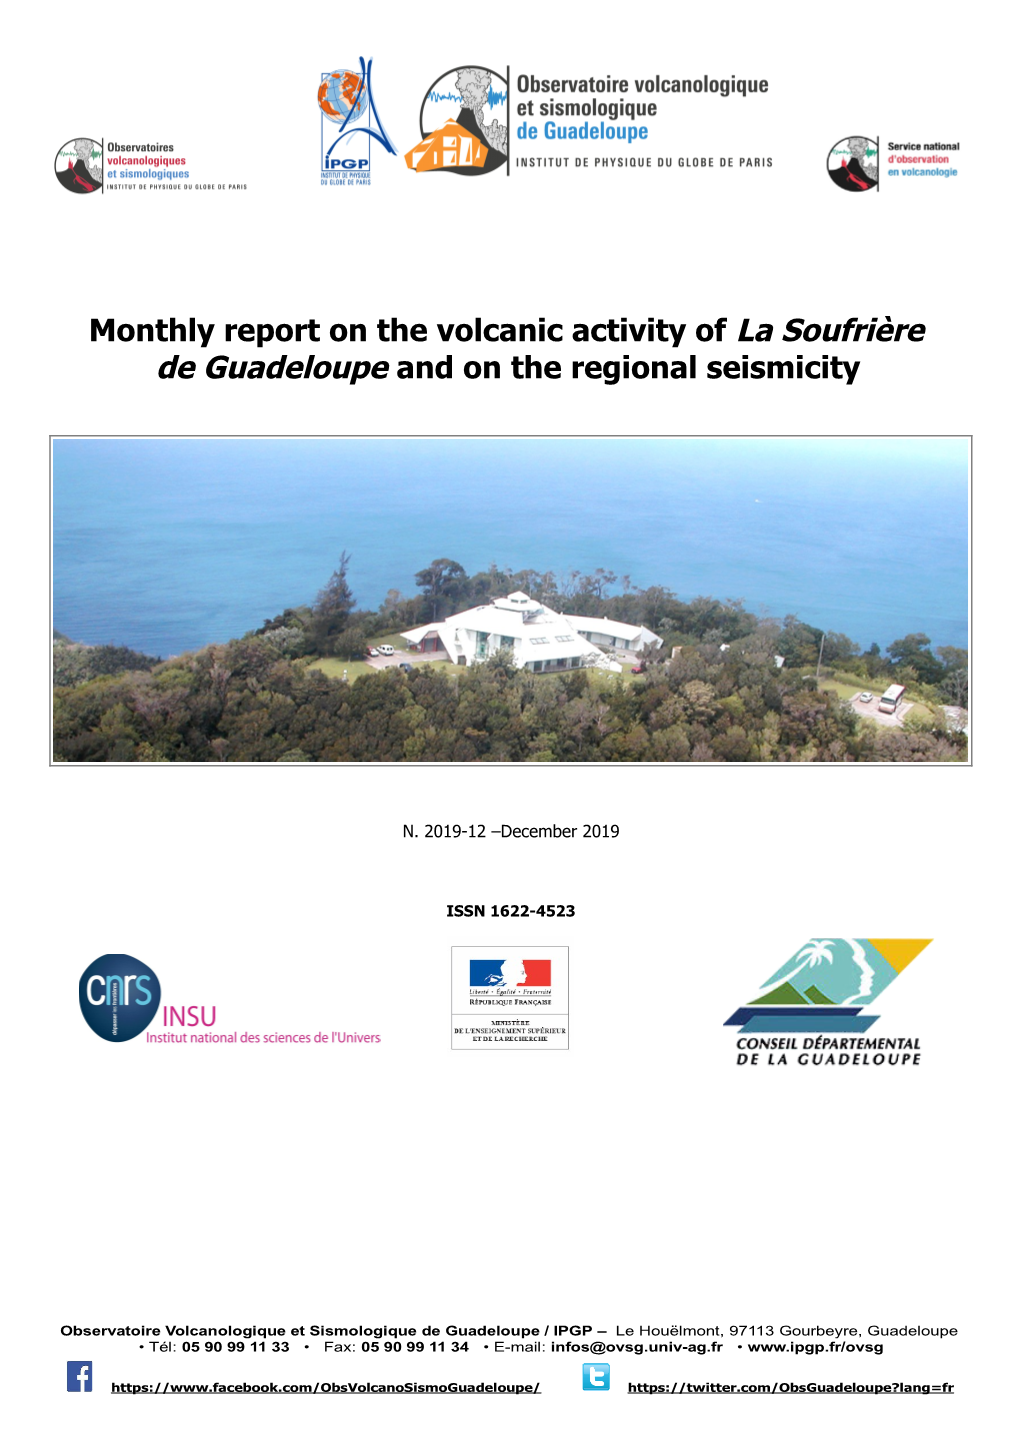 Monthly Report on the Volcanic Activity of La Soufrière De Guadeloupe and on the Regional Seismicity